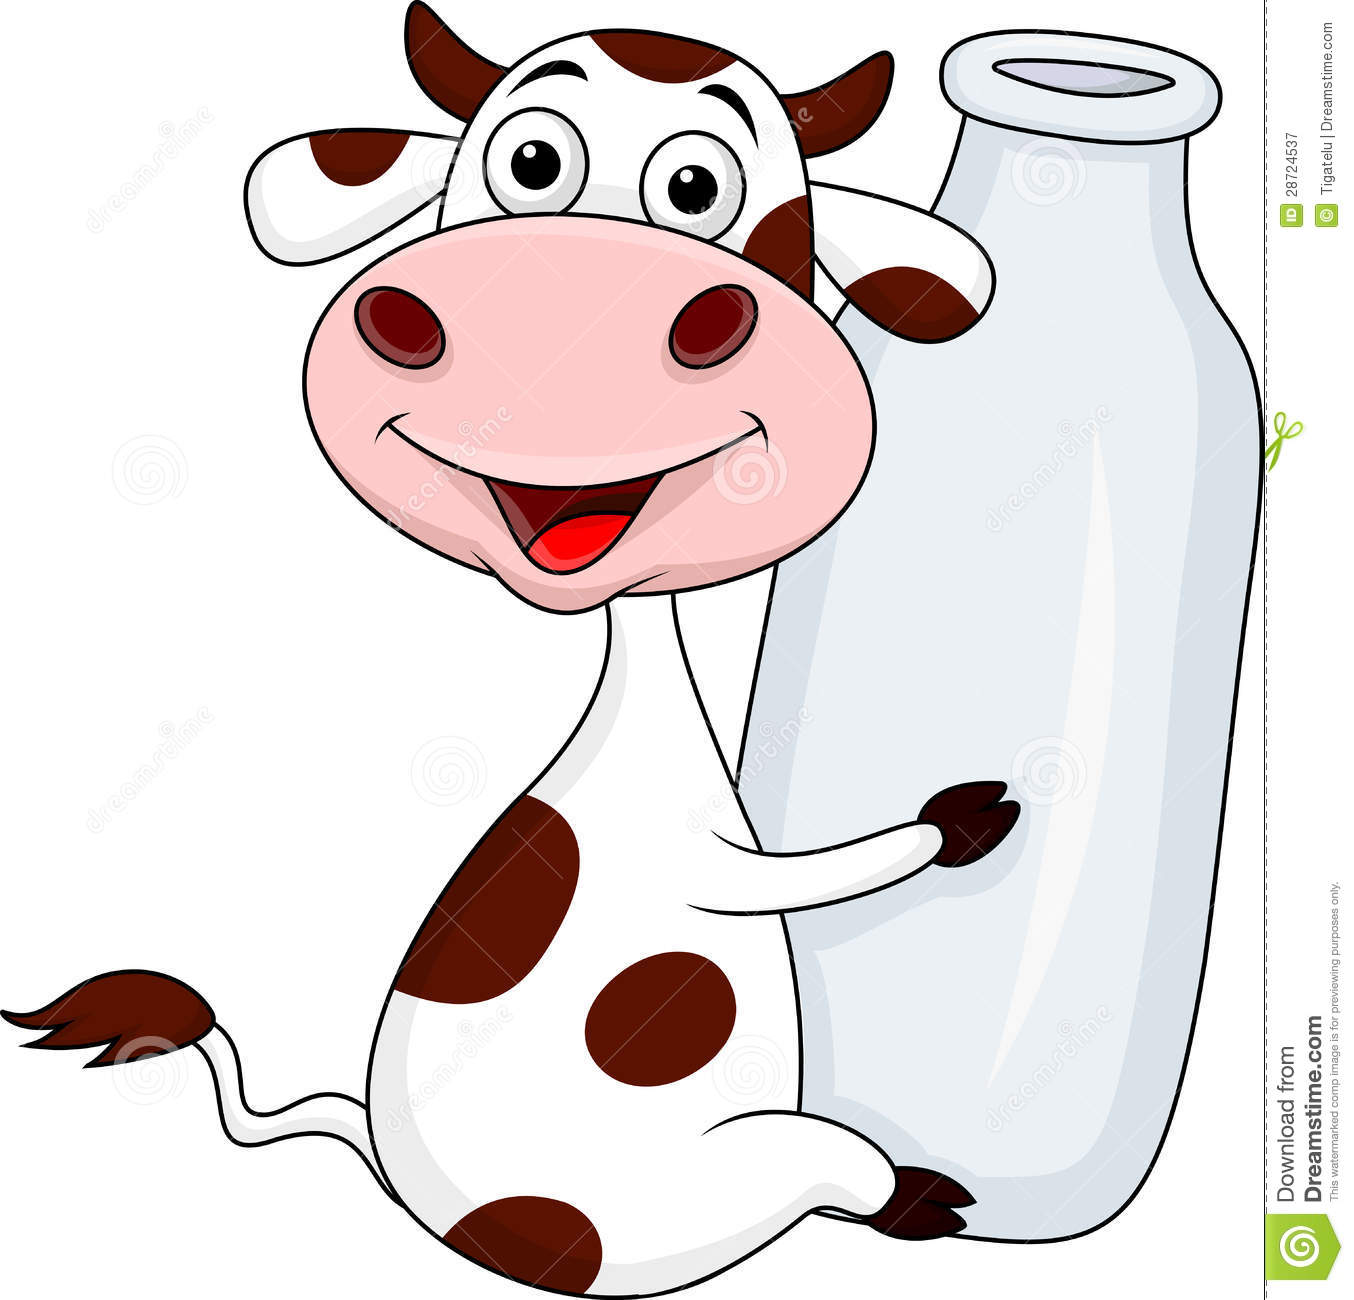 Cow With Milk Bottle Royalty Free Stock Photography   Image  28724537